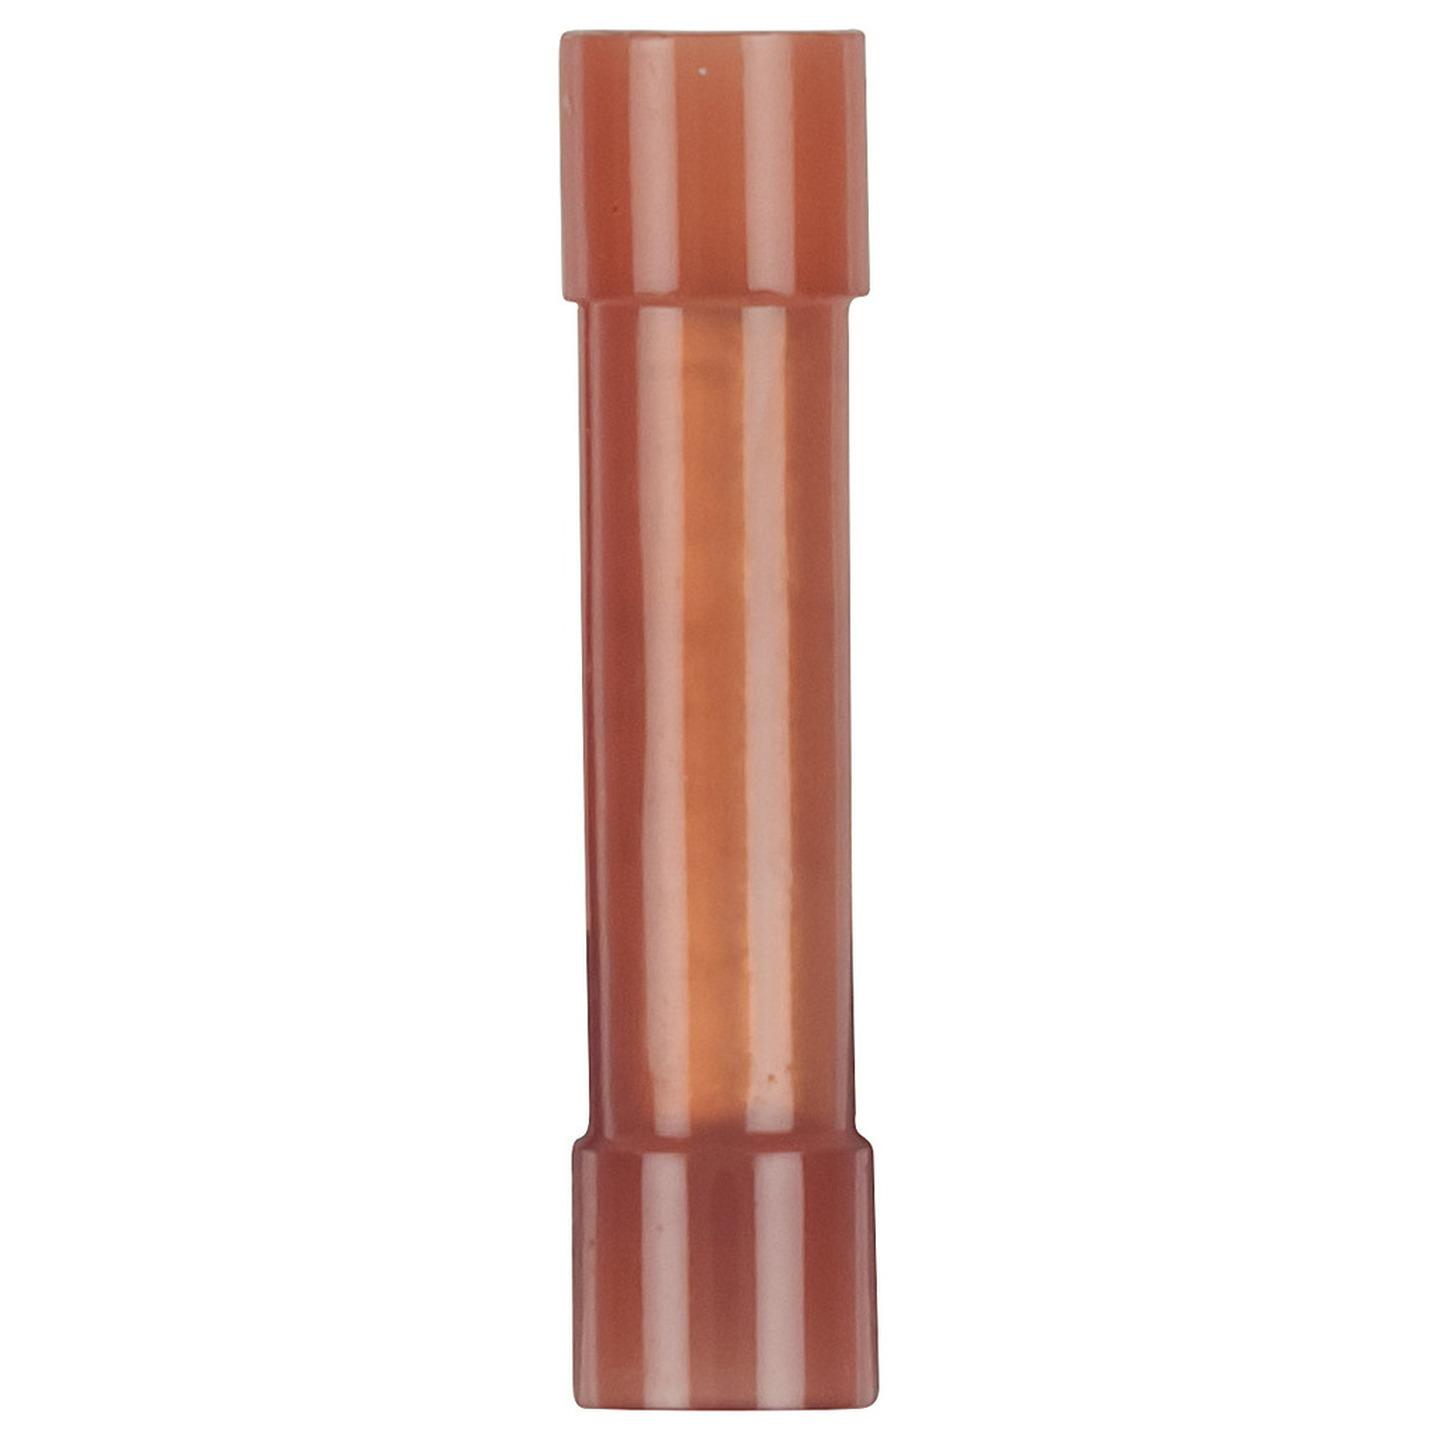 Butt Connector - Red - Pack of 8